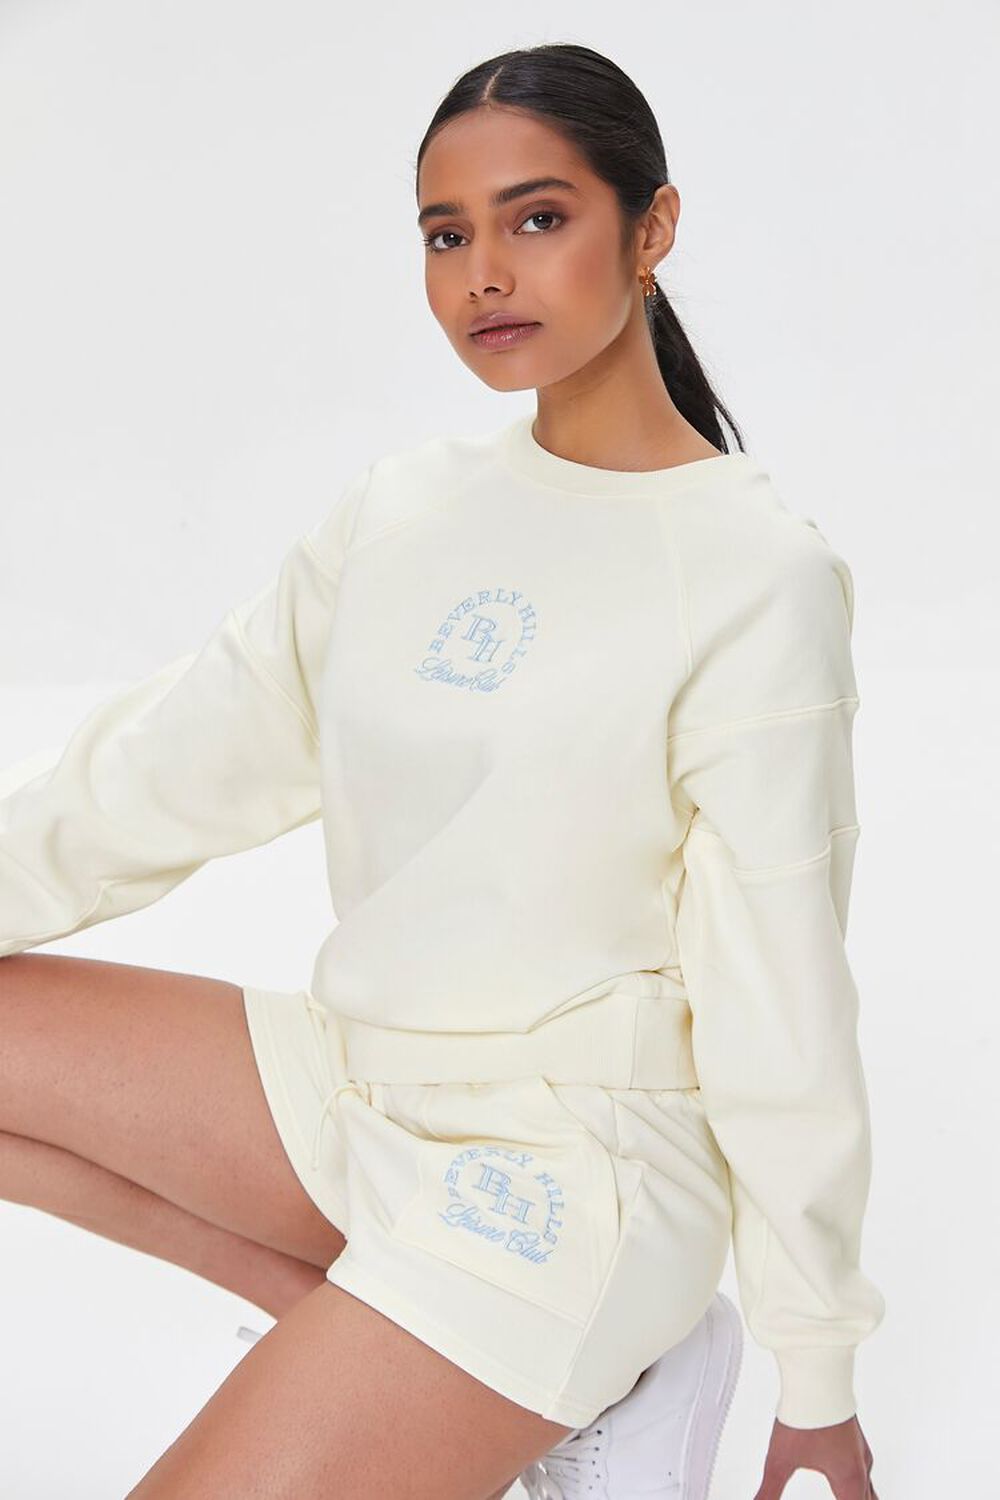 CREAM/BLUE Embroidered Beverly Hills Pullover, image 1